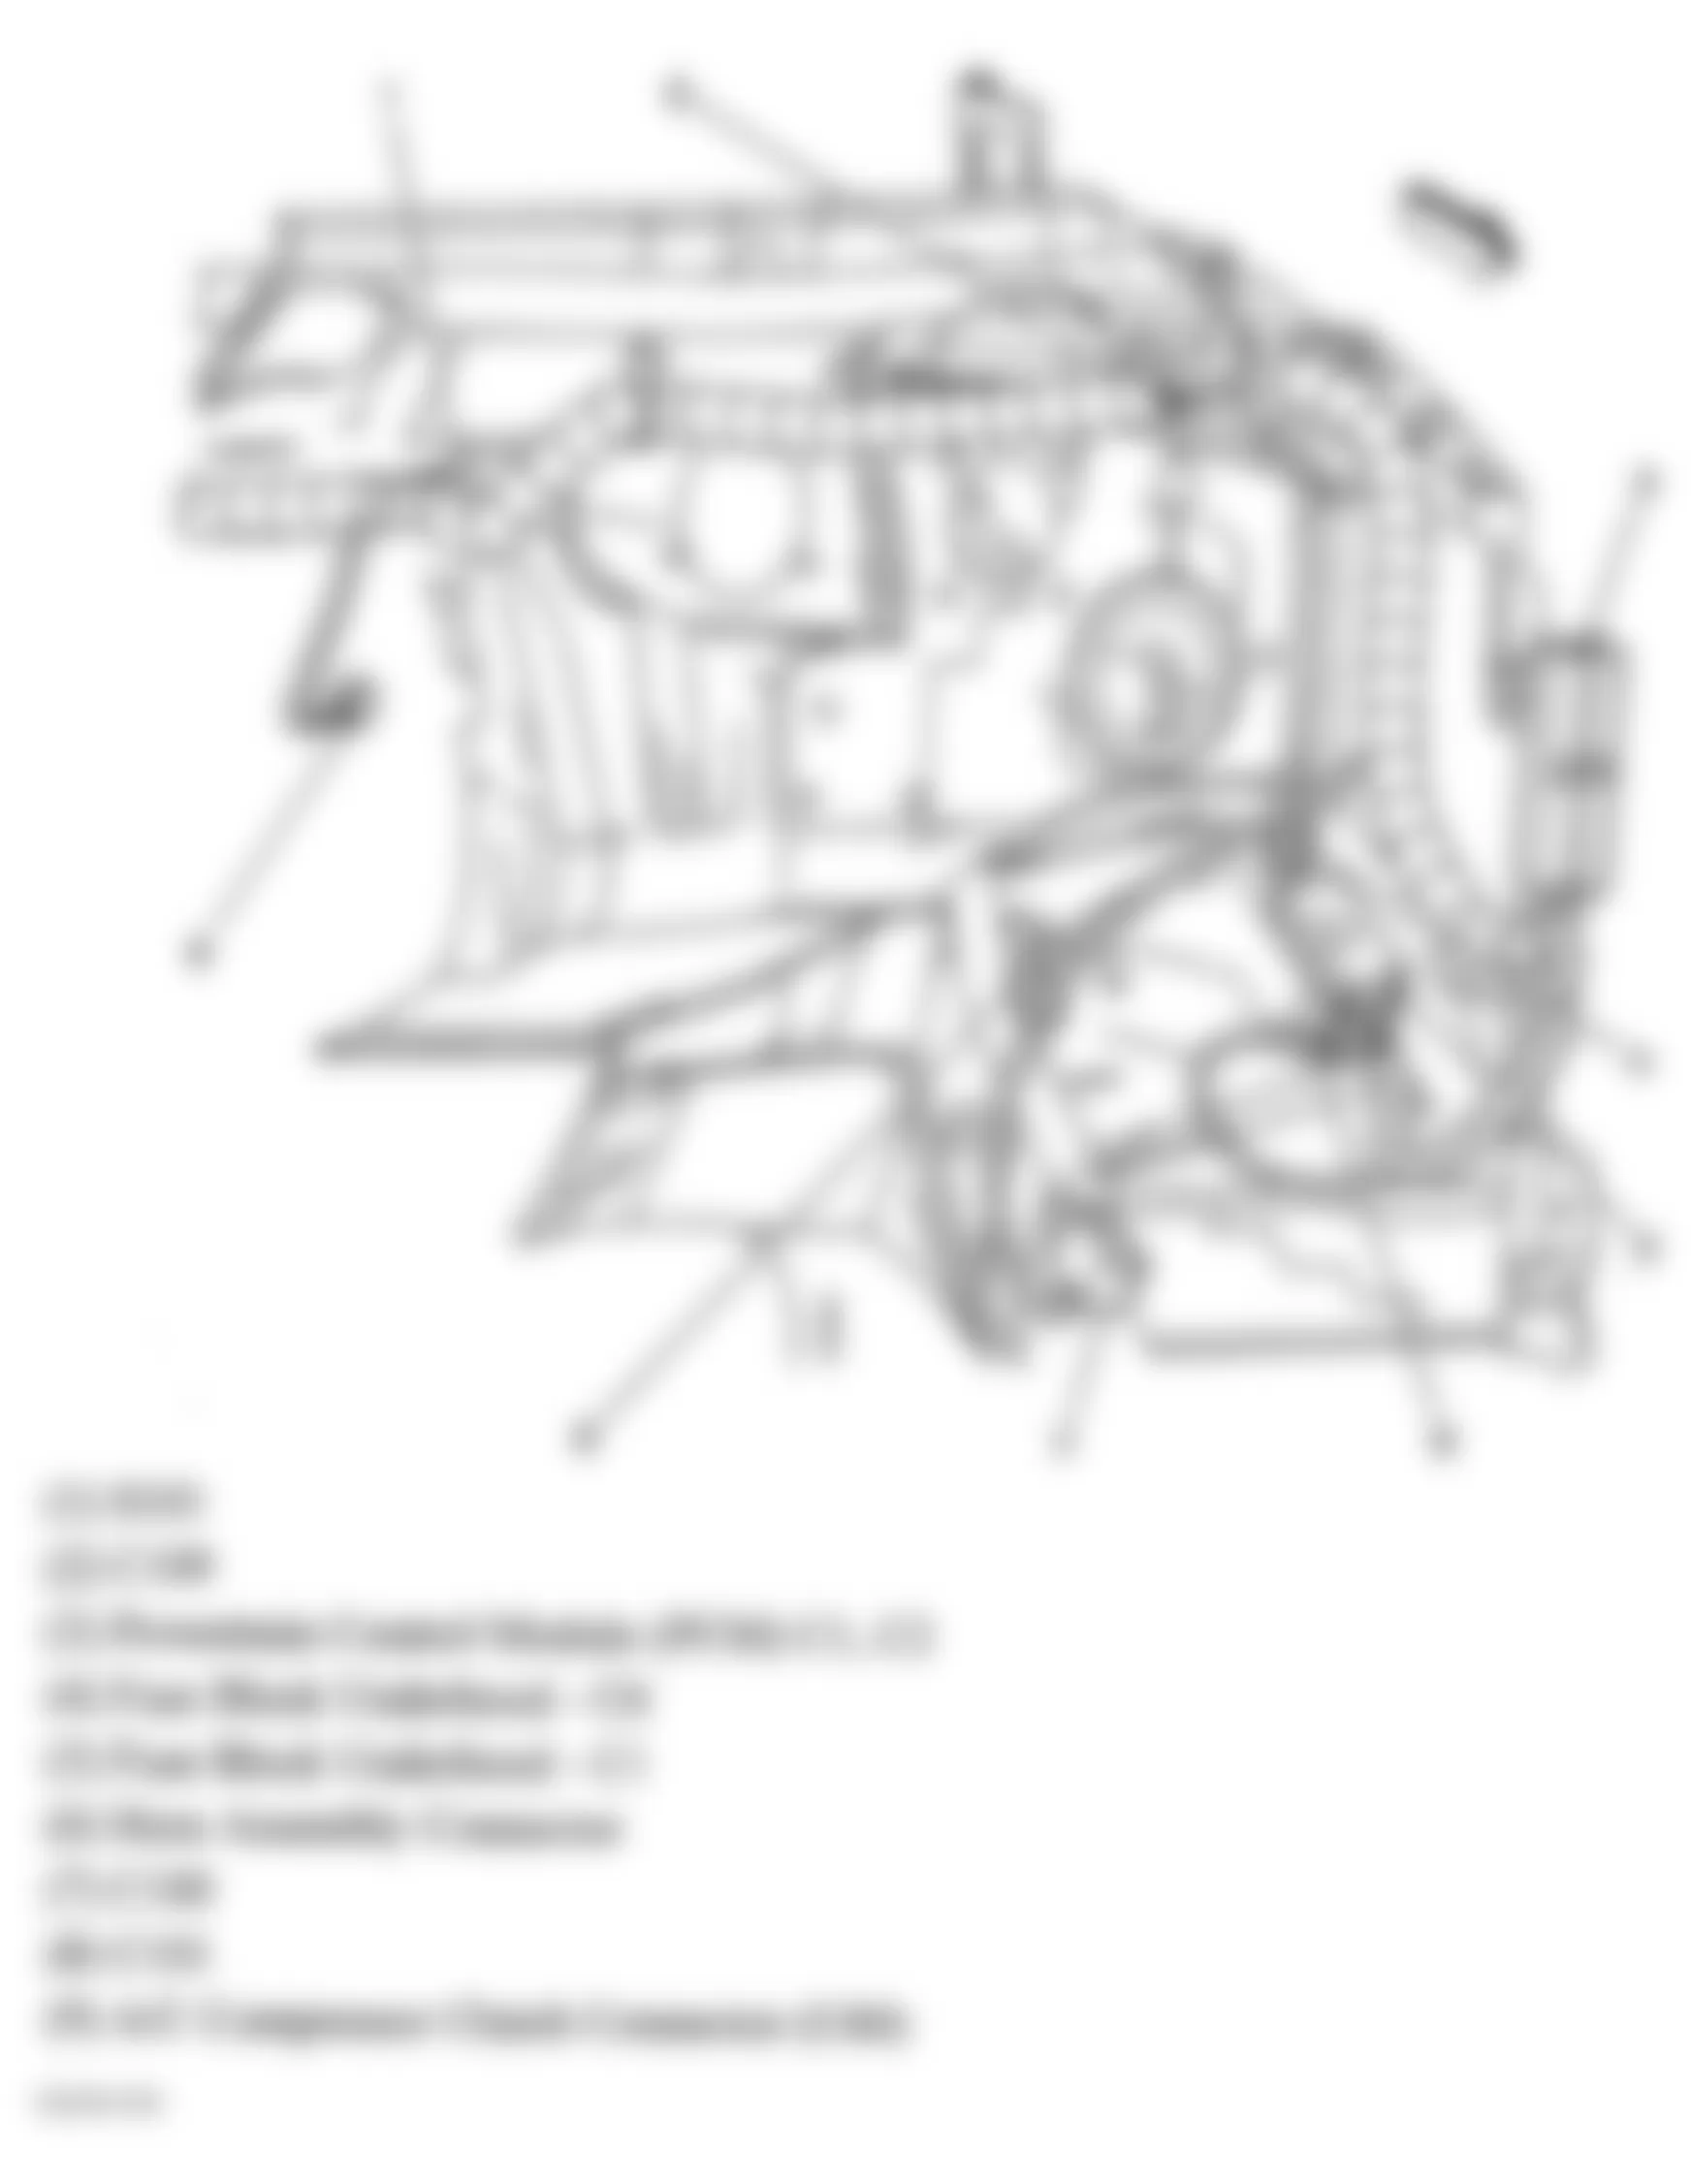 GMC Savana G2500 2006 - Component Locations -  Left Rear Of Engine Compartment